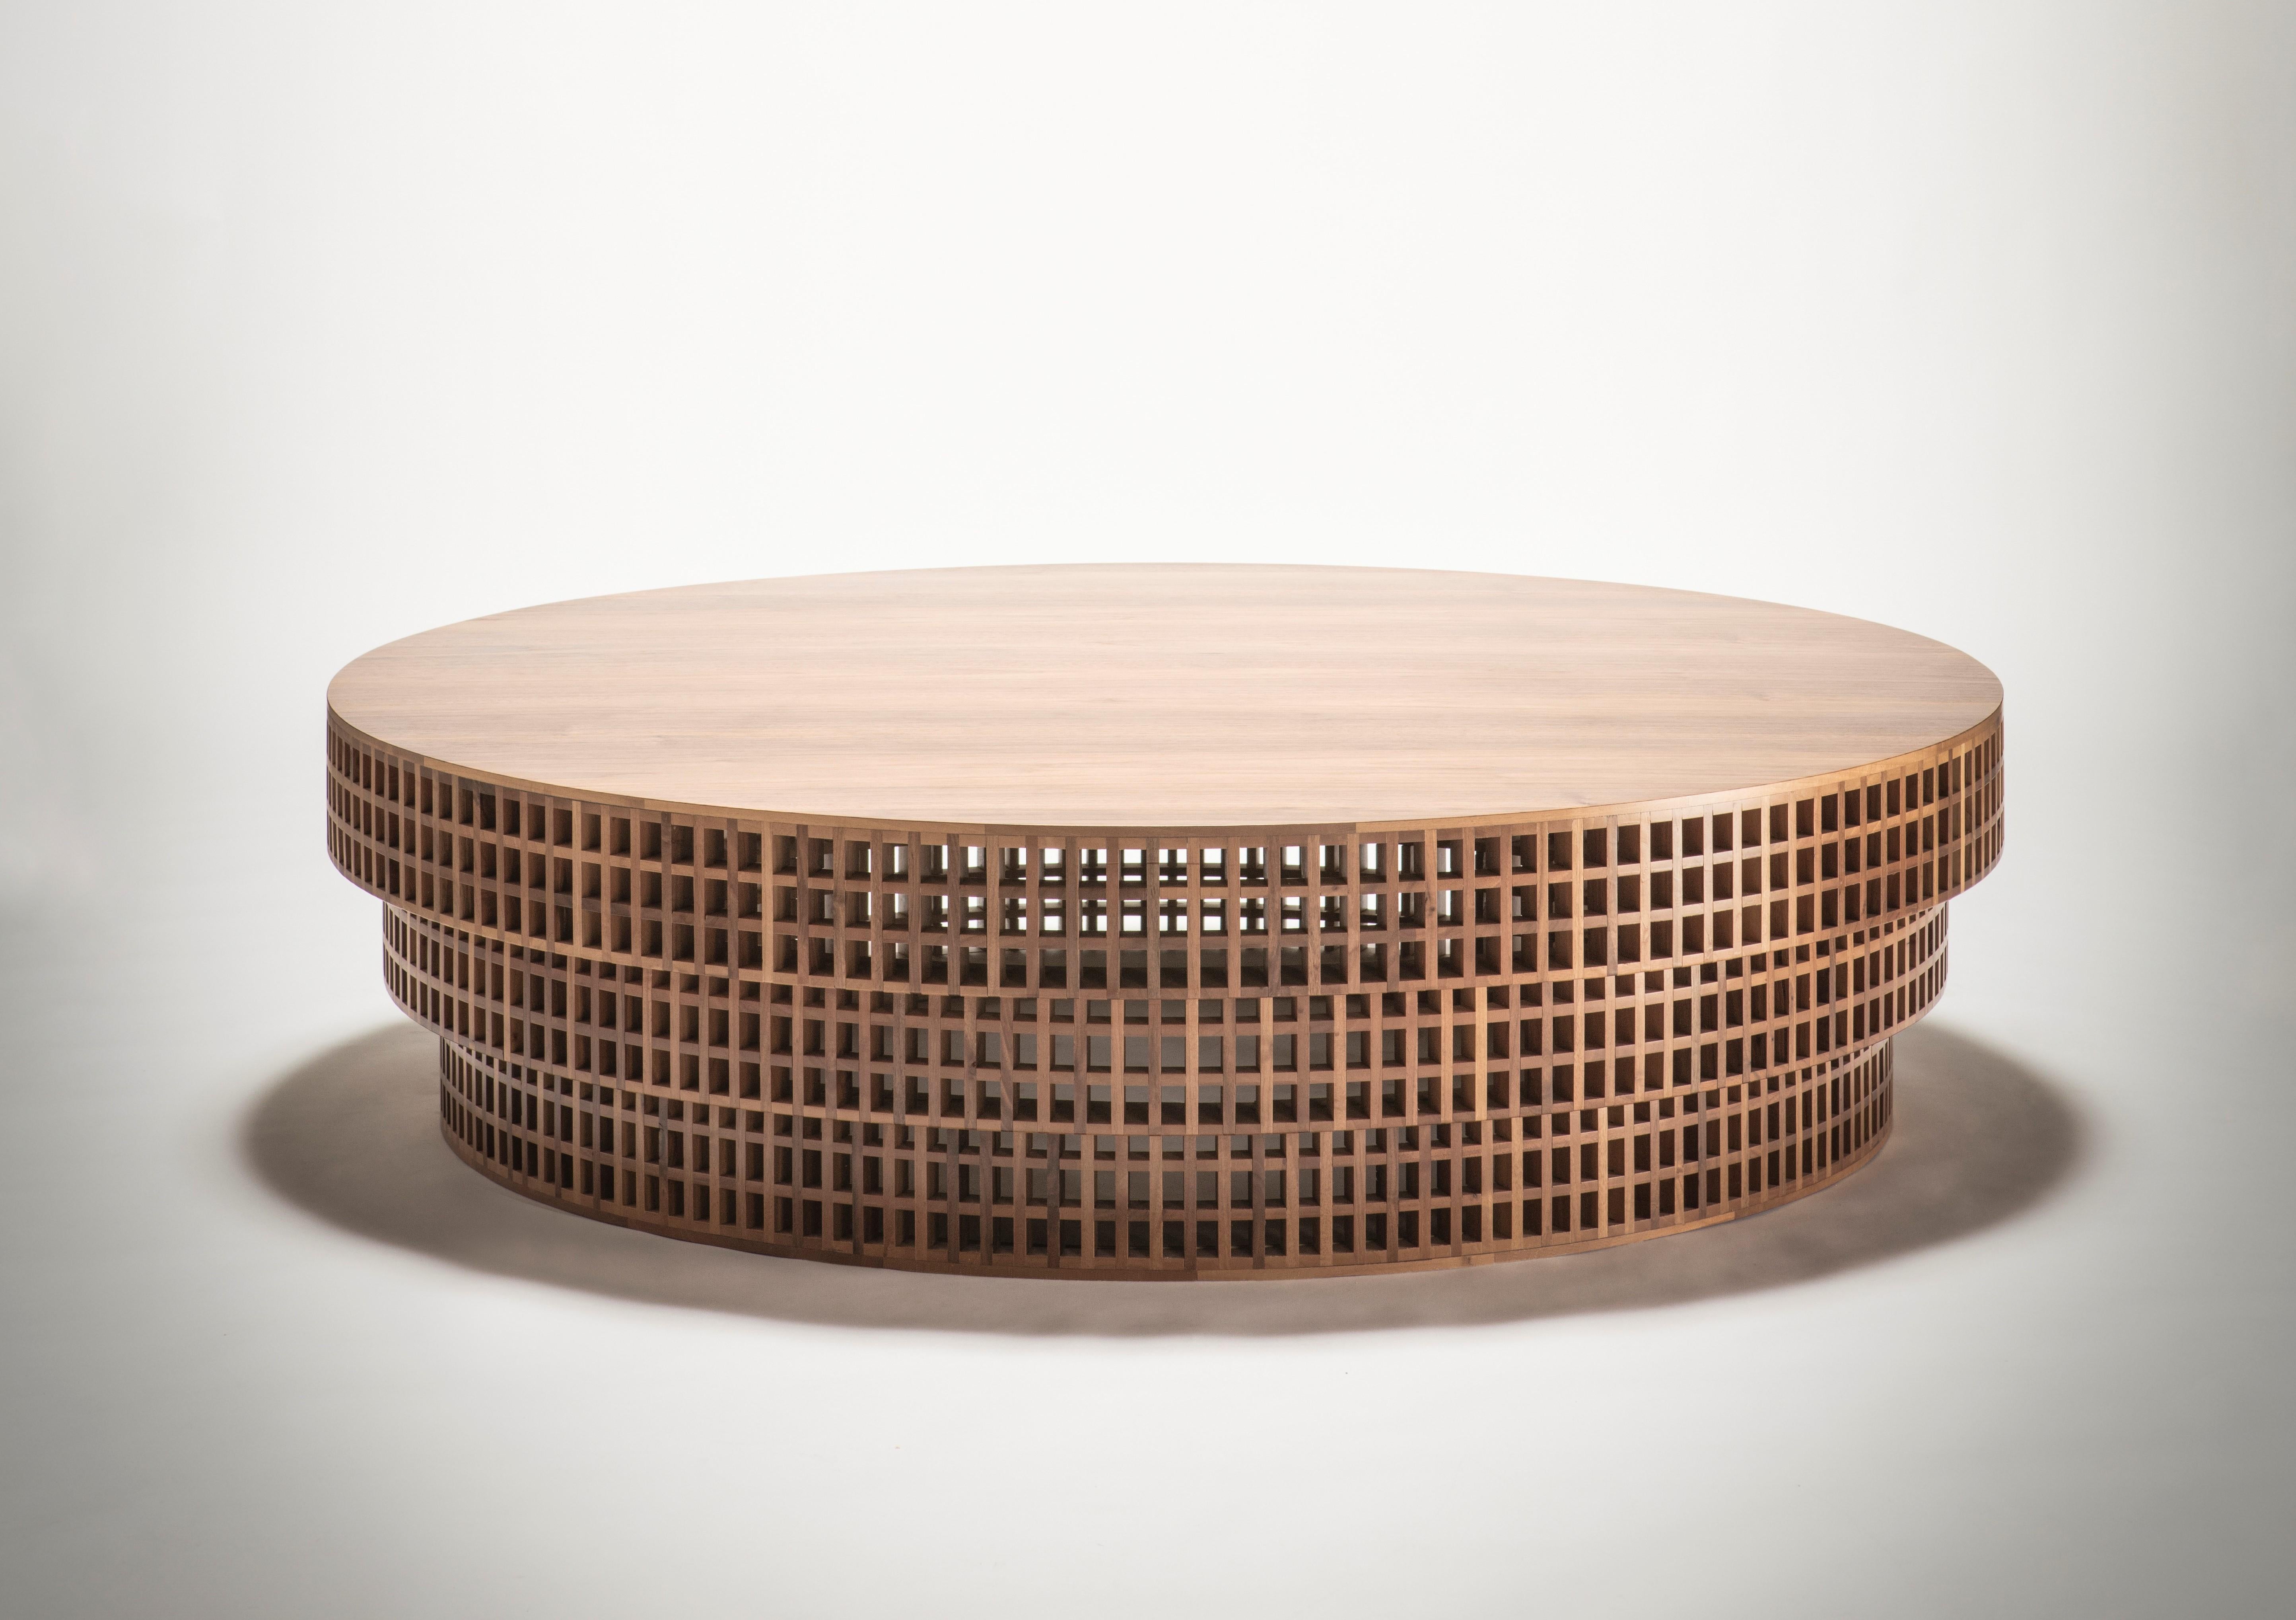 Verniciato Contemporary crafted table, large central table by Cara Davide for Medulum in vendita